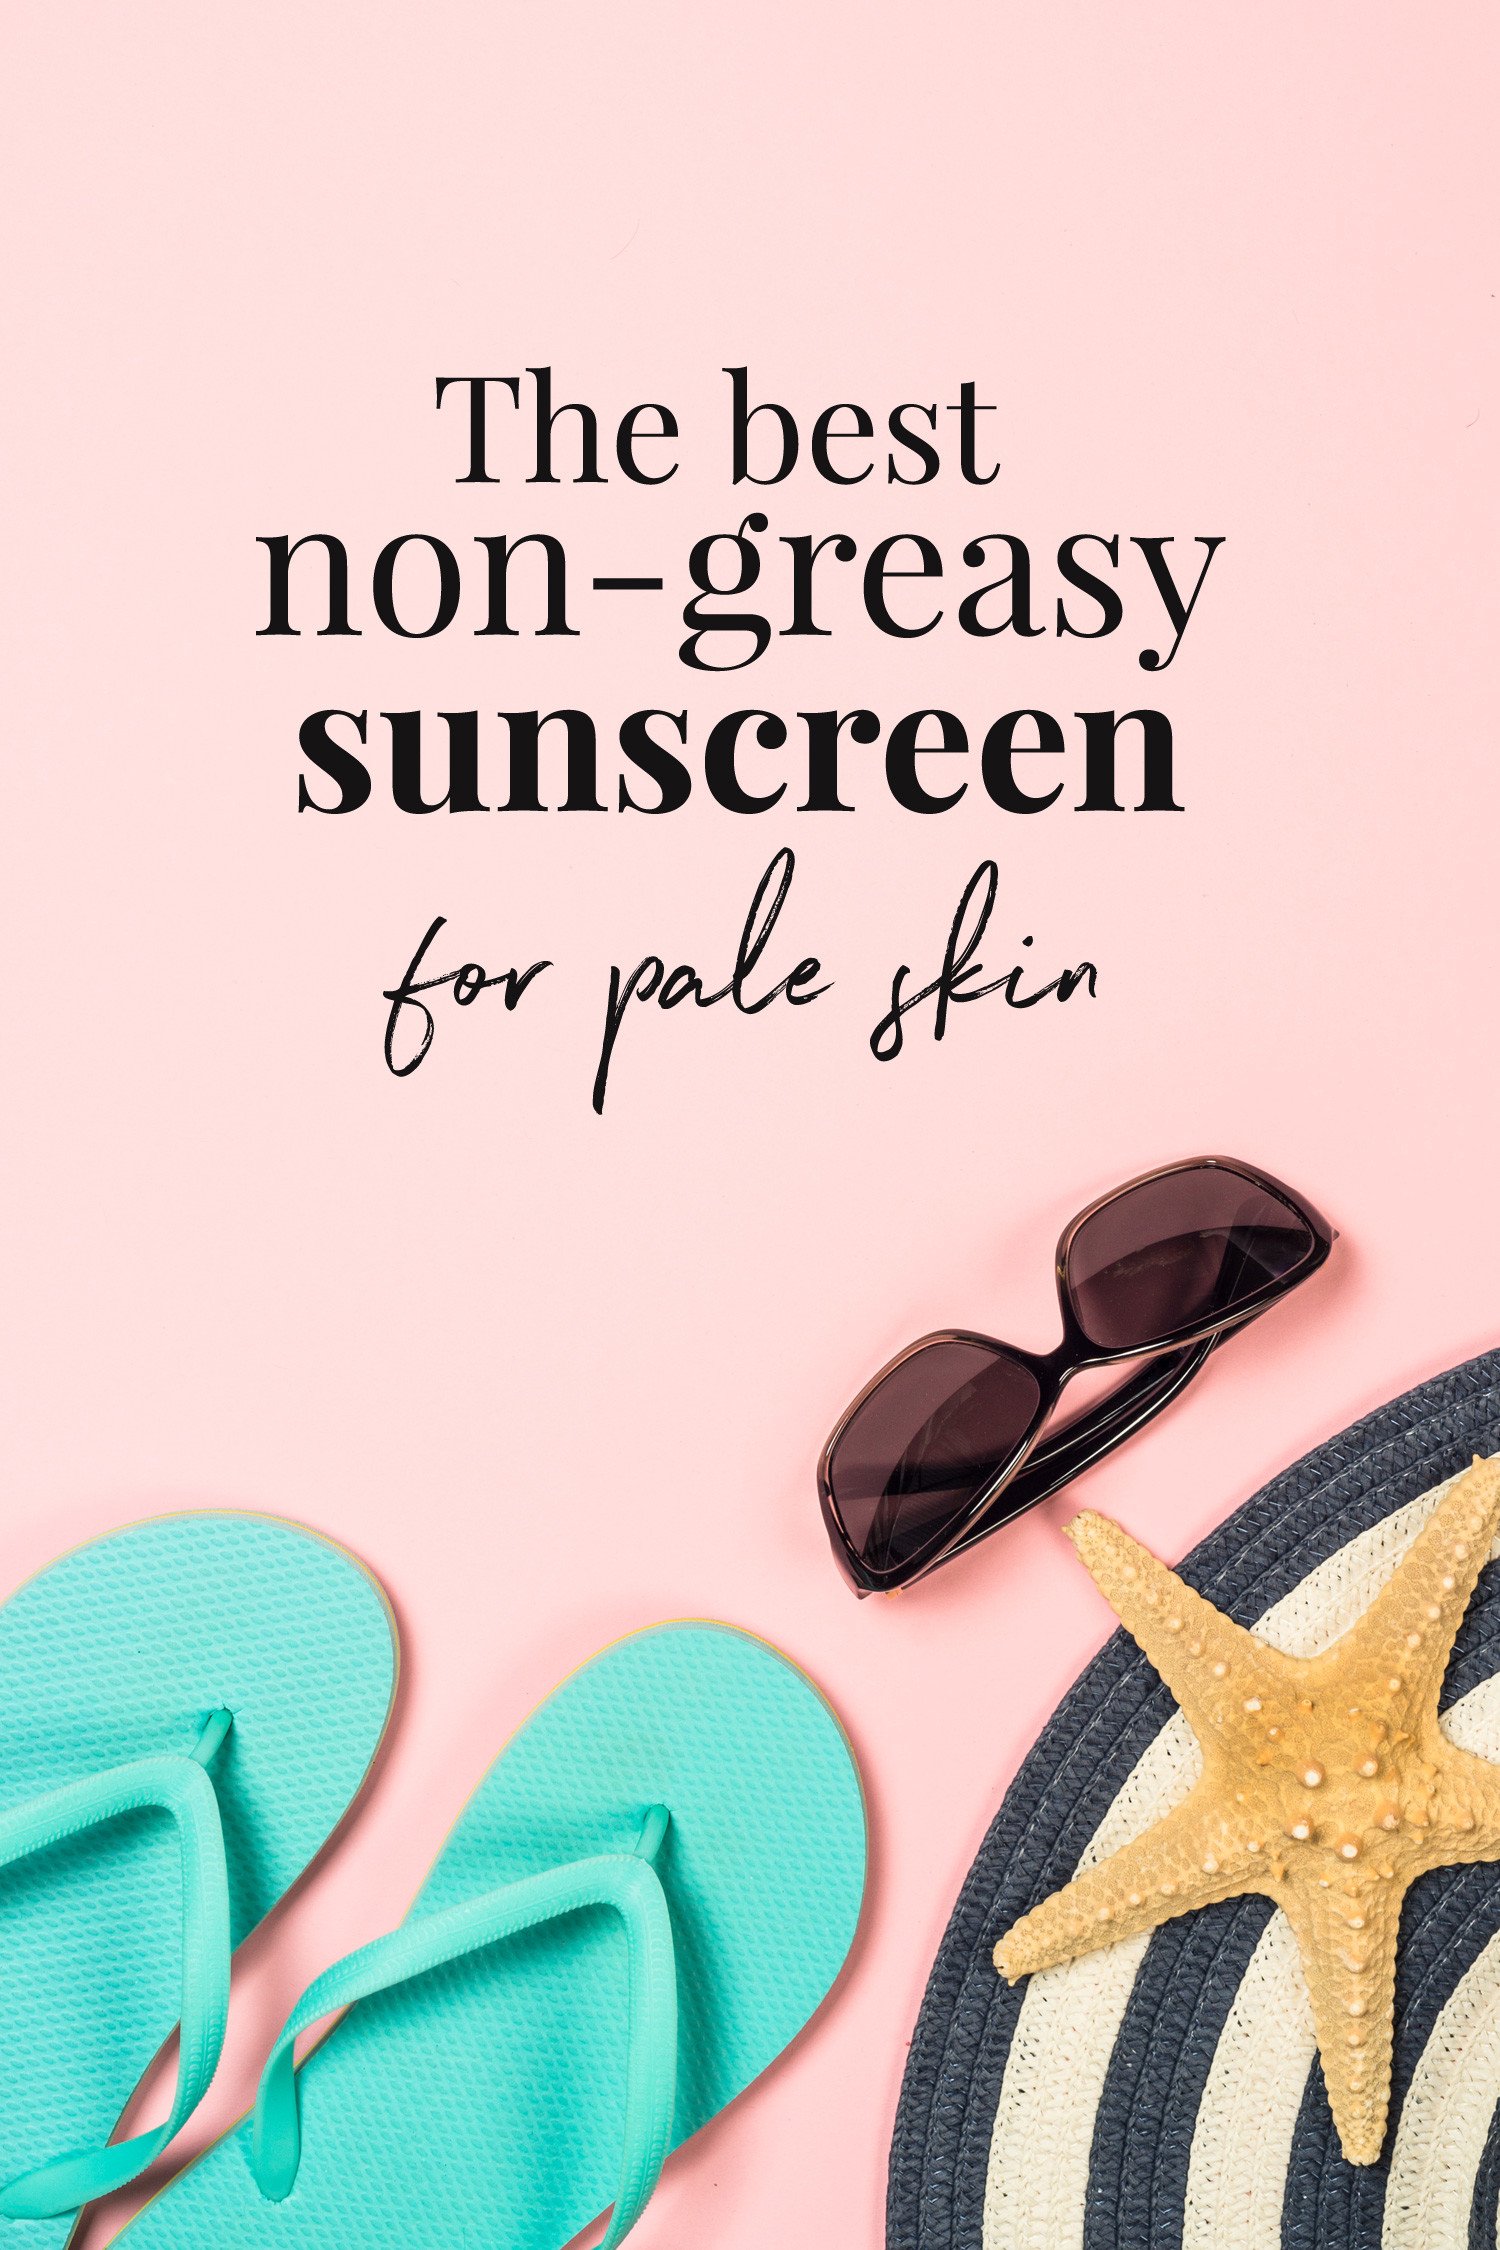 the best non-greasy sunscreen for pale skin